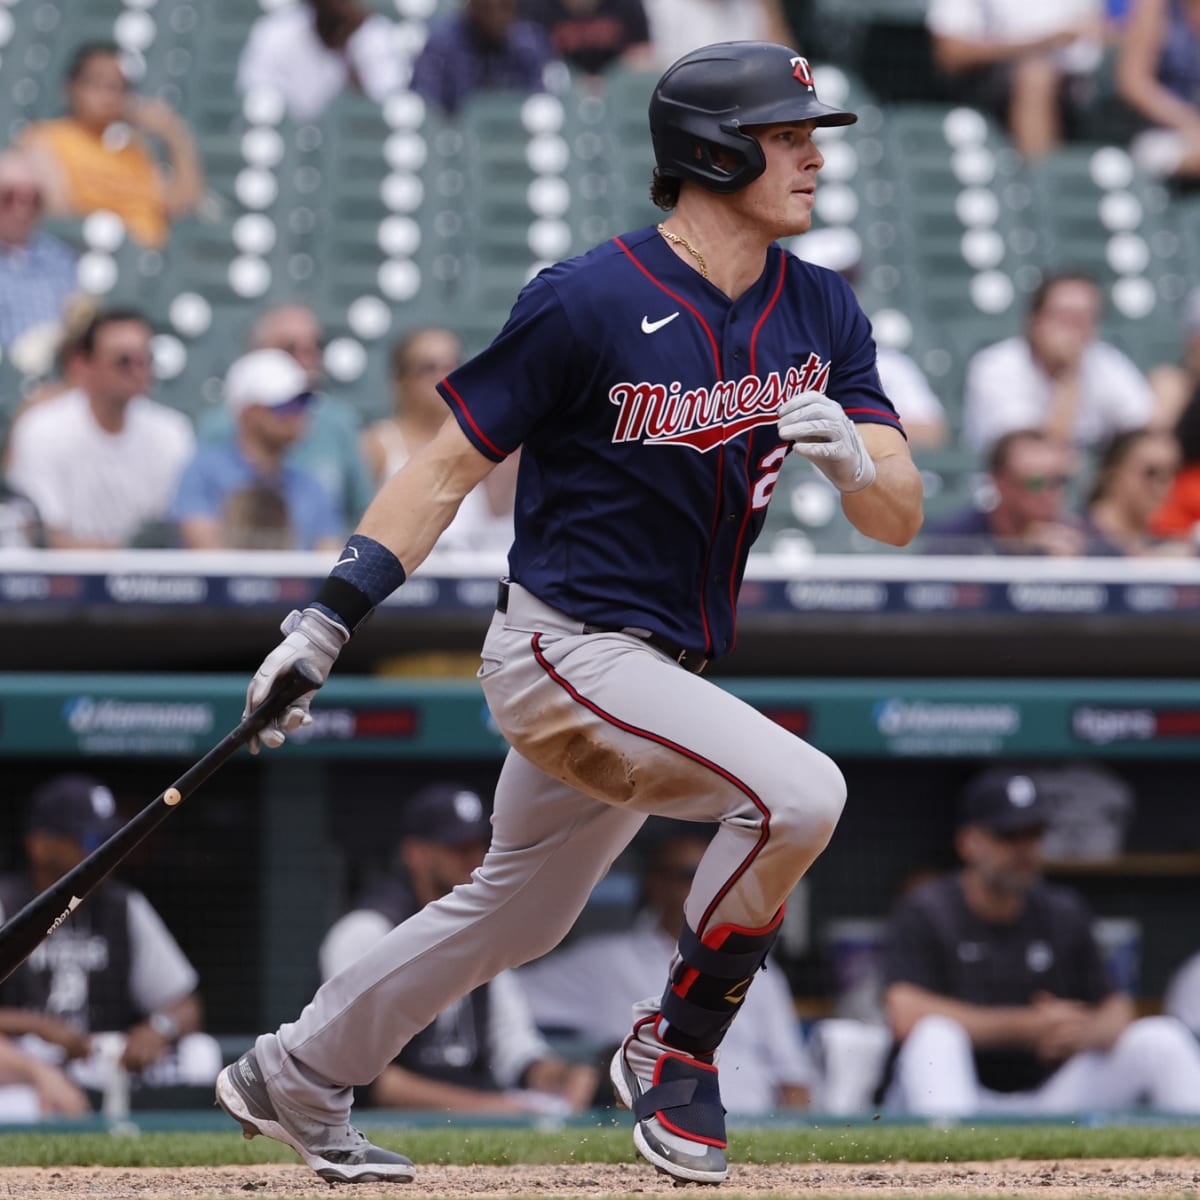 Free from “bad juju,” Twins' Max Kepler starts to heat up – Twin Cities